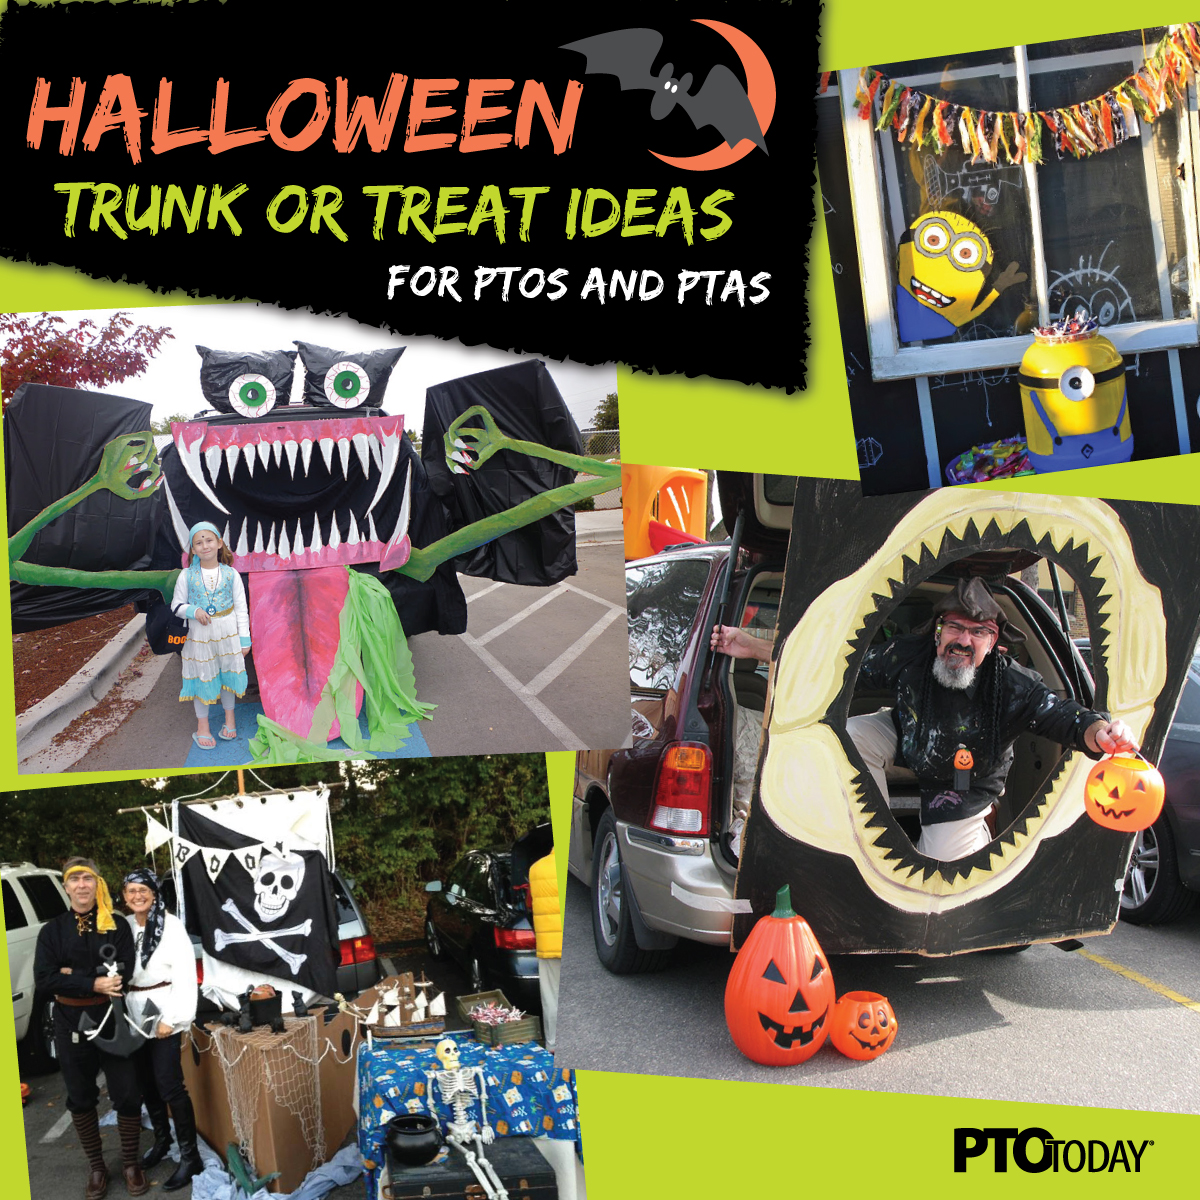 How to organize a trunk or treat Halloween event